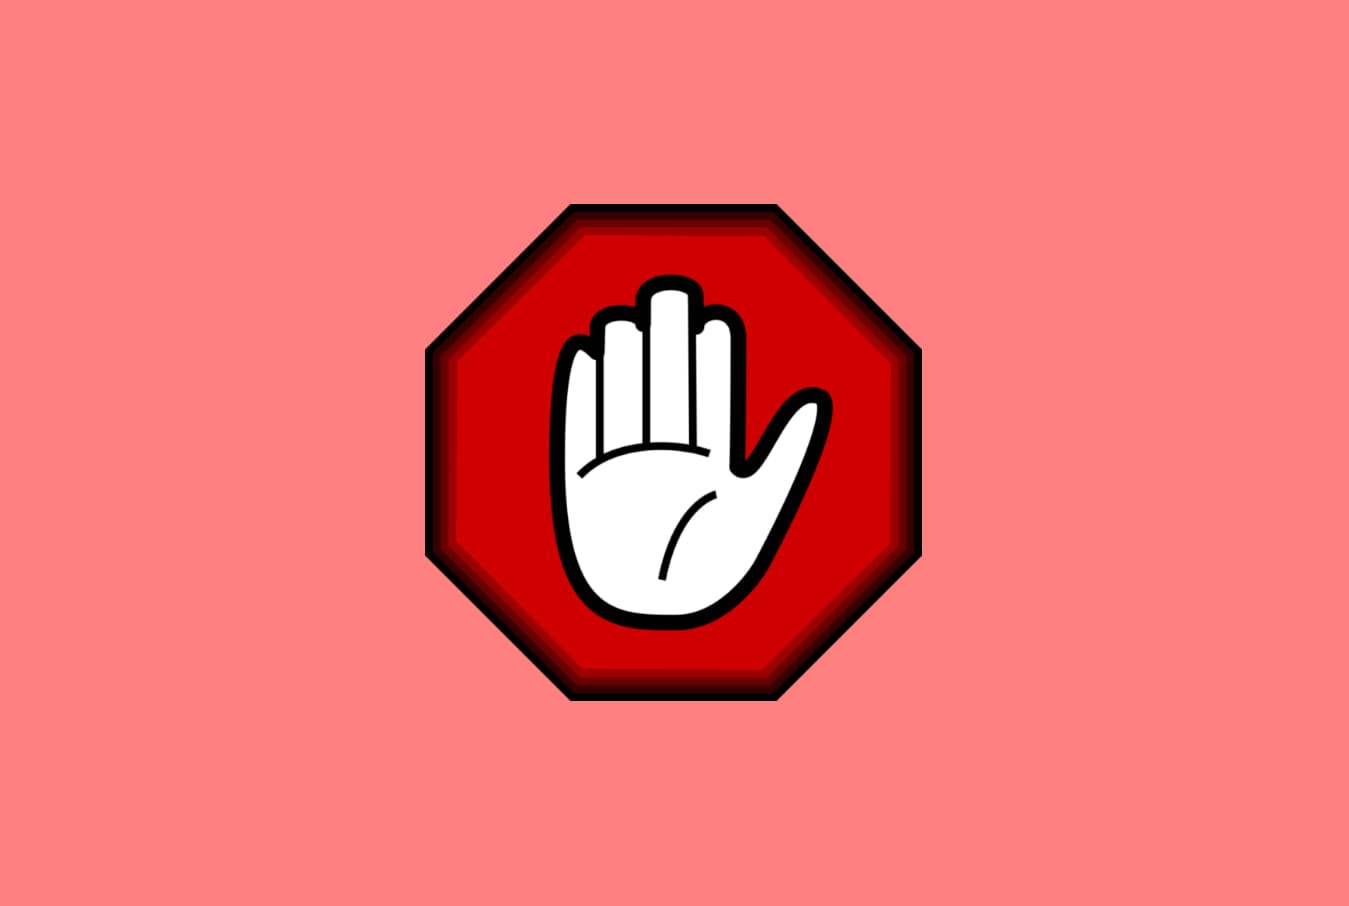 CISA suggests using ad blockers to fend off 'malvertising' - Securing your browser